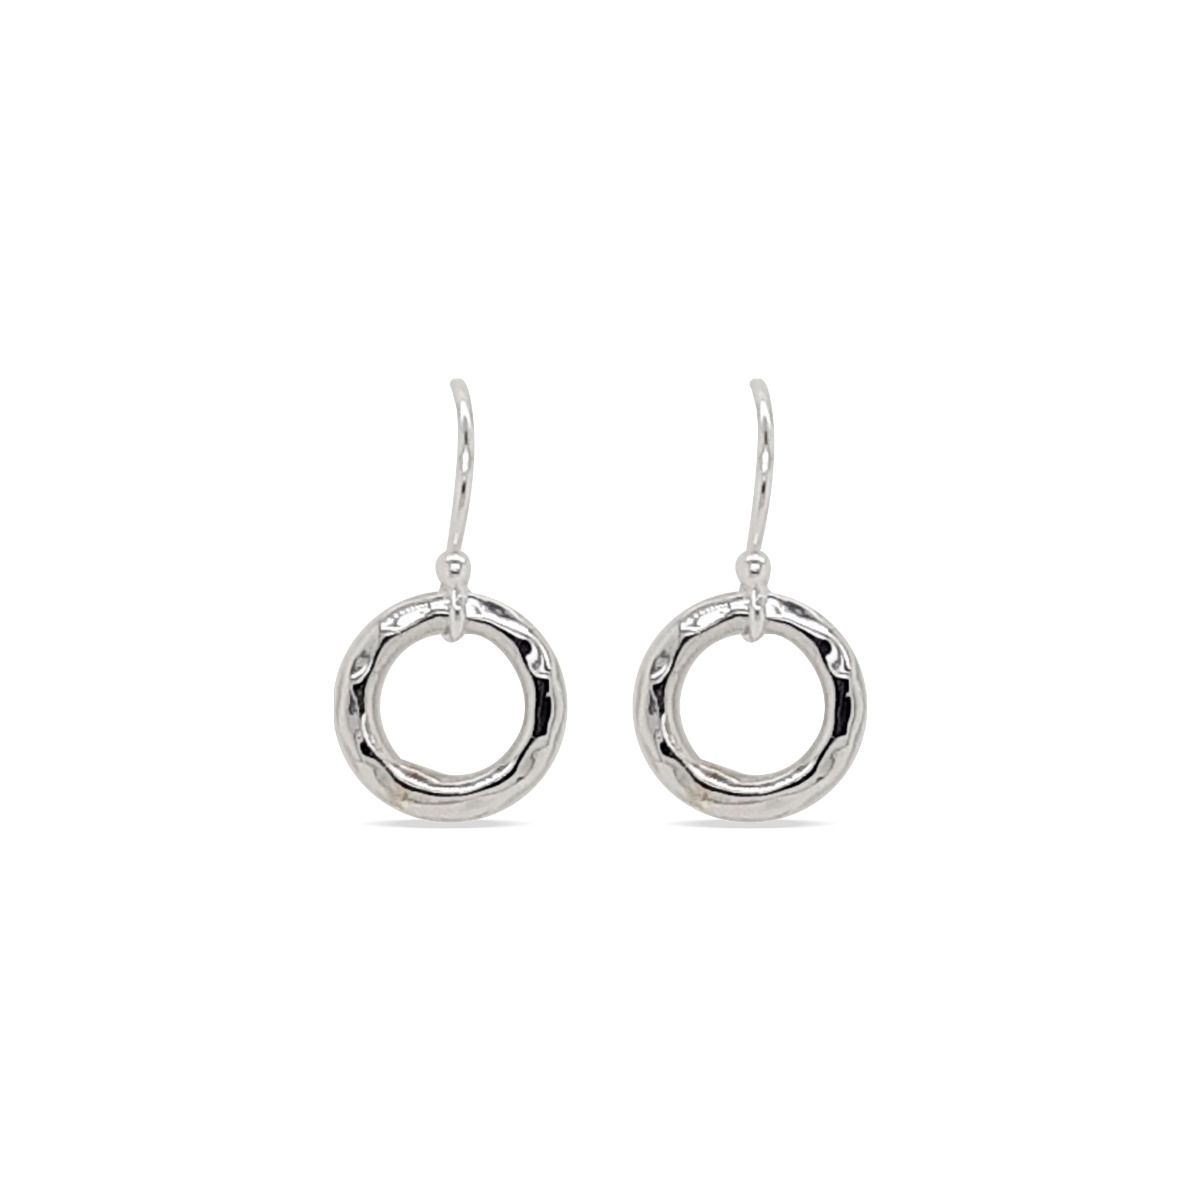 EARRINGS S/S HAMMERED CIRCLE